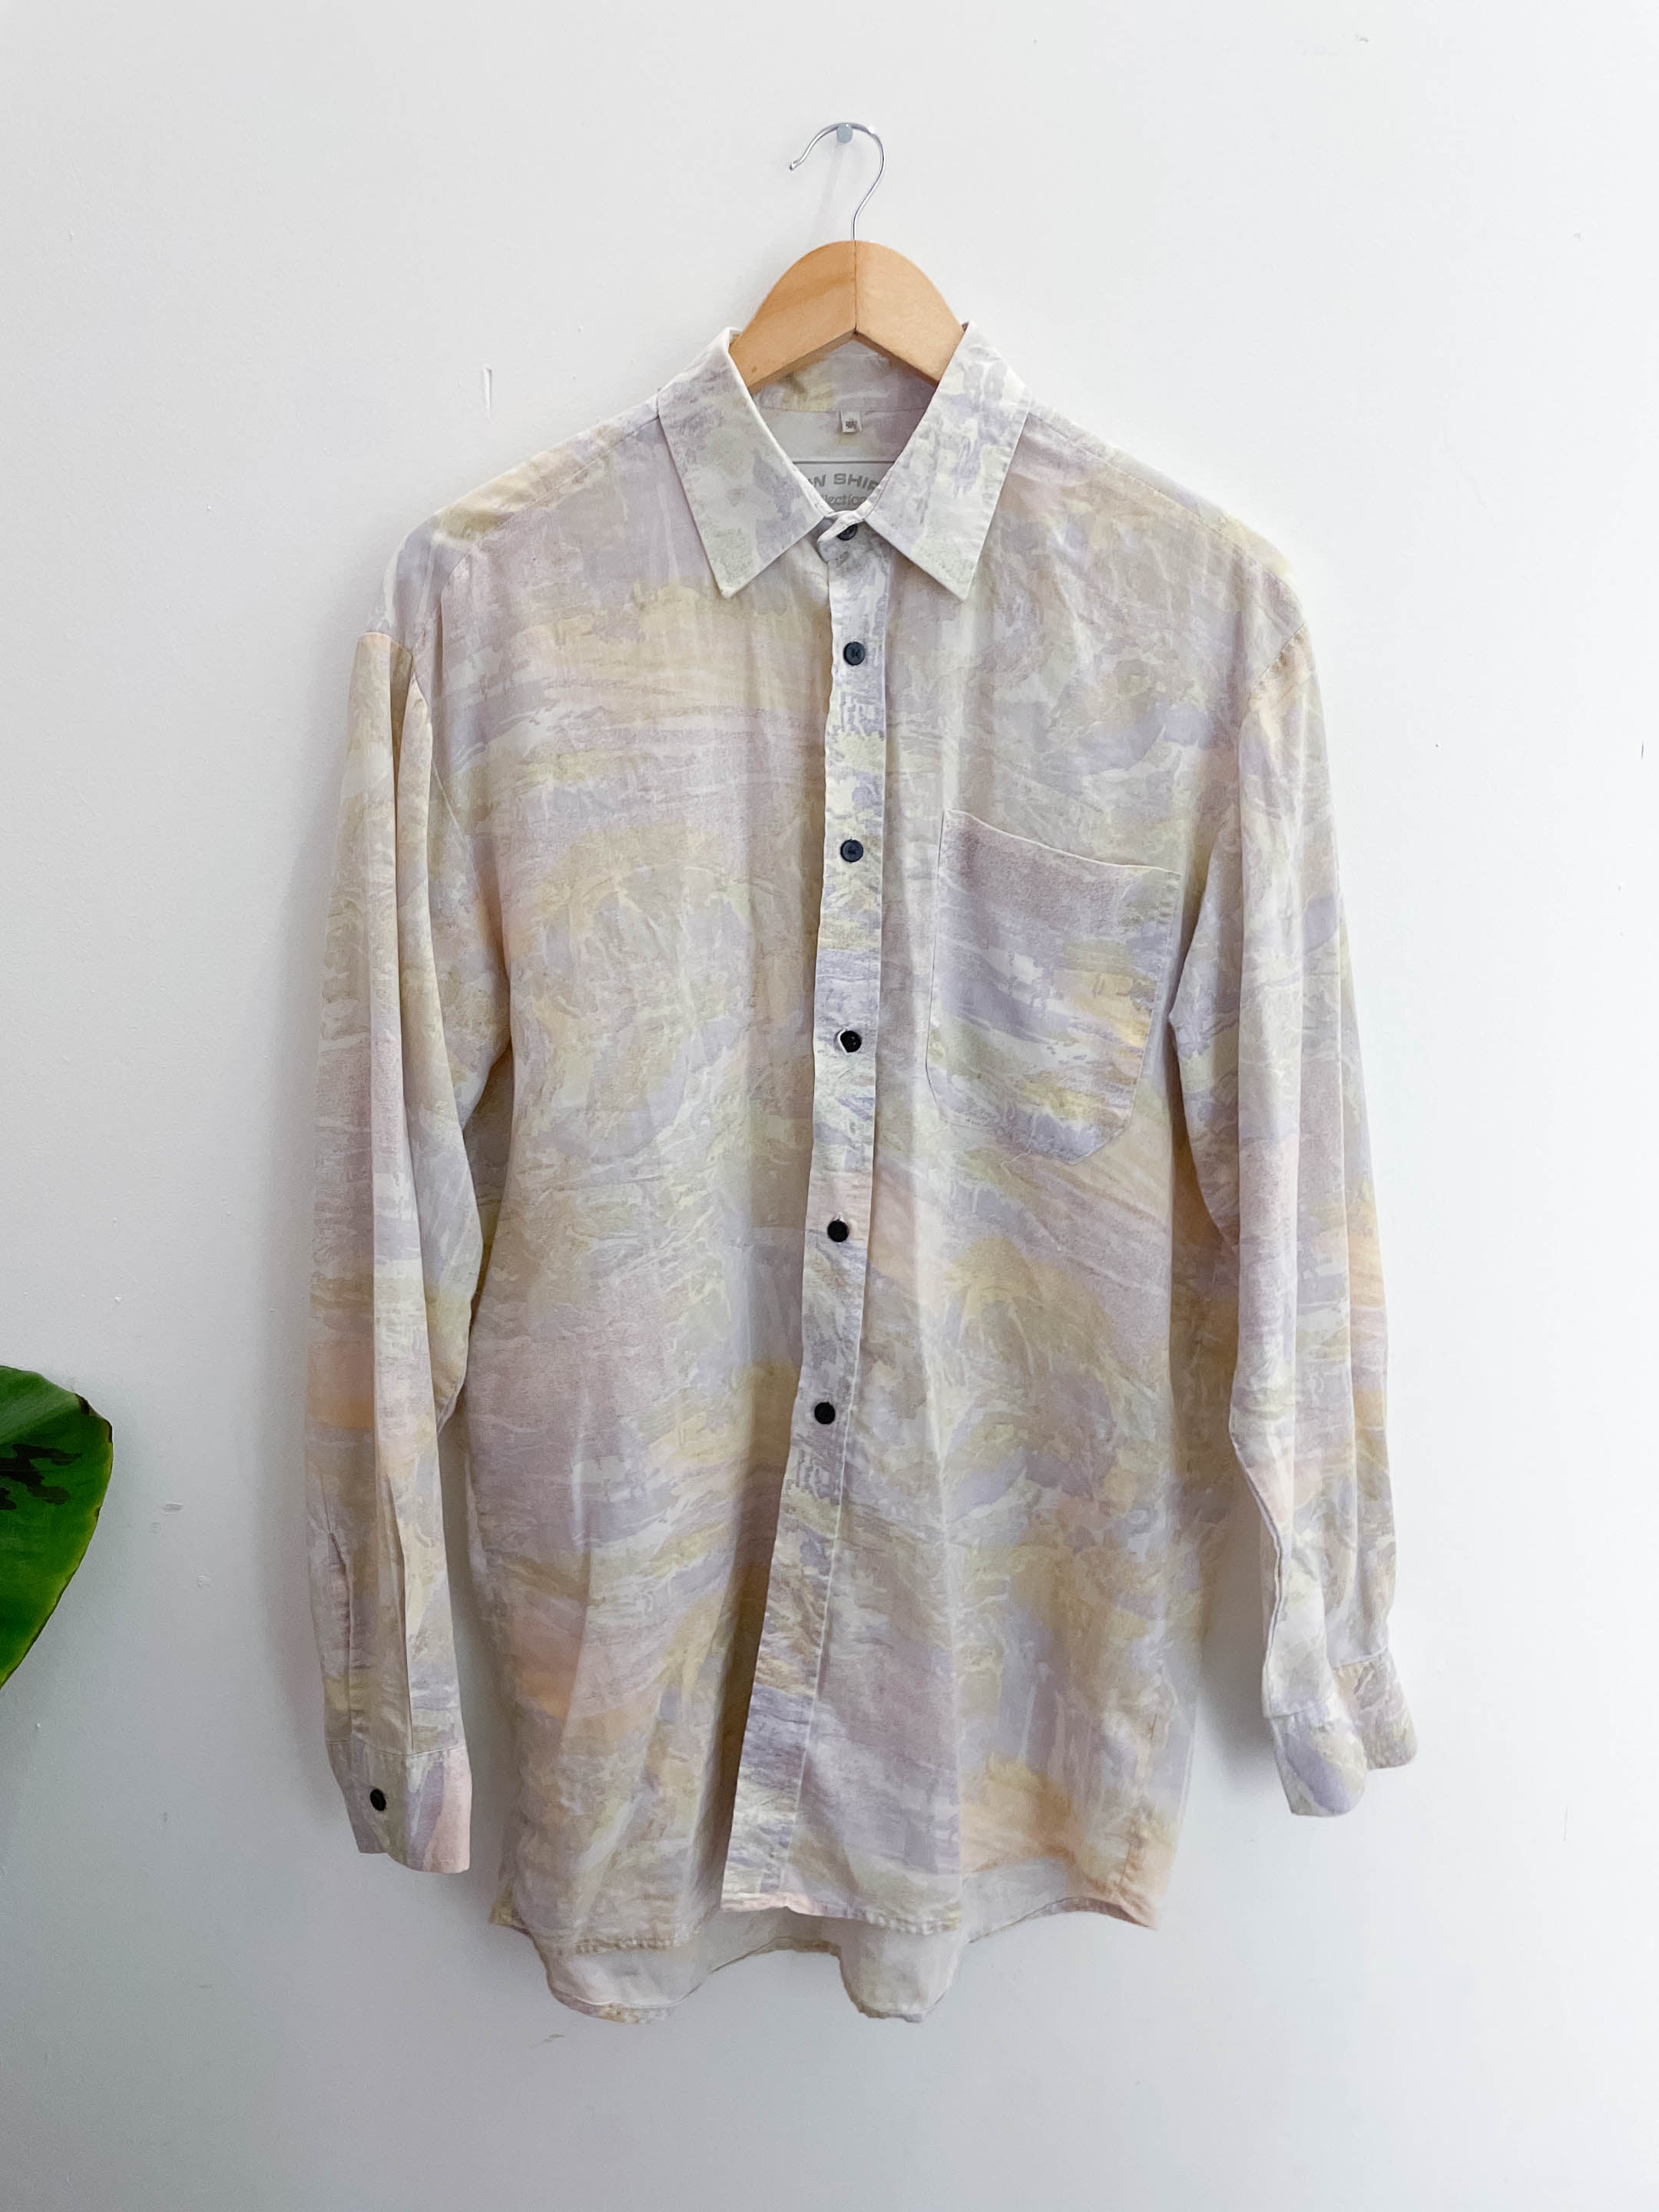 Vintage new shirt collection cream abstract pattern long sleeve shirt size M